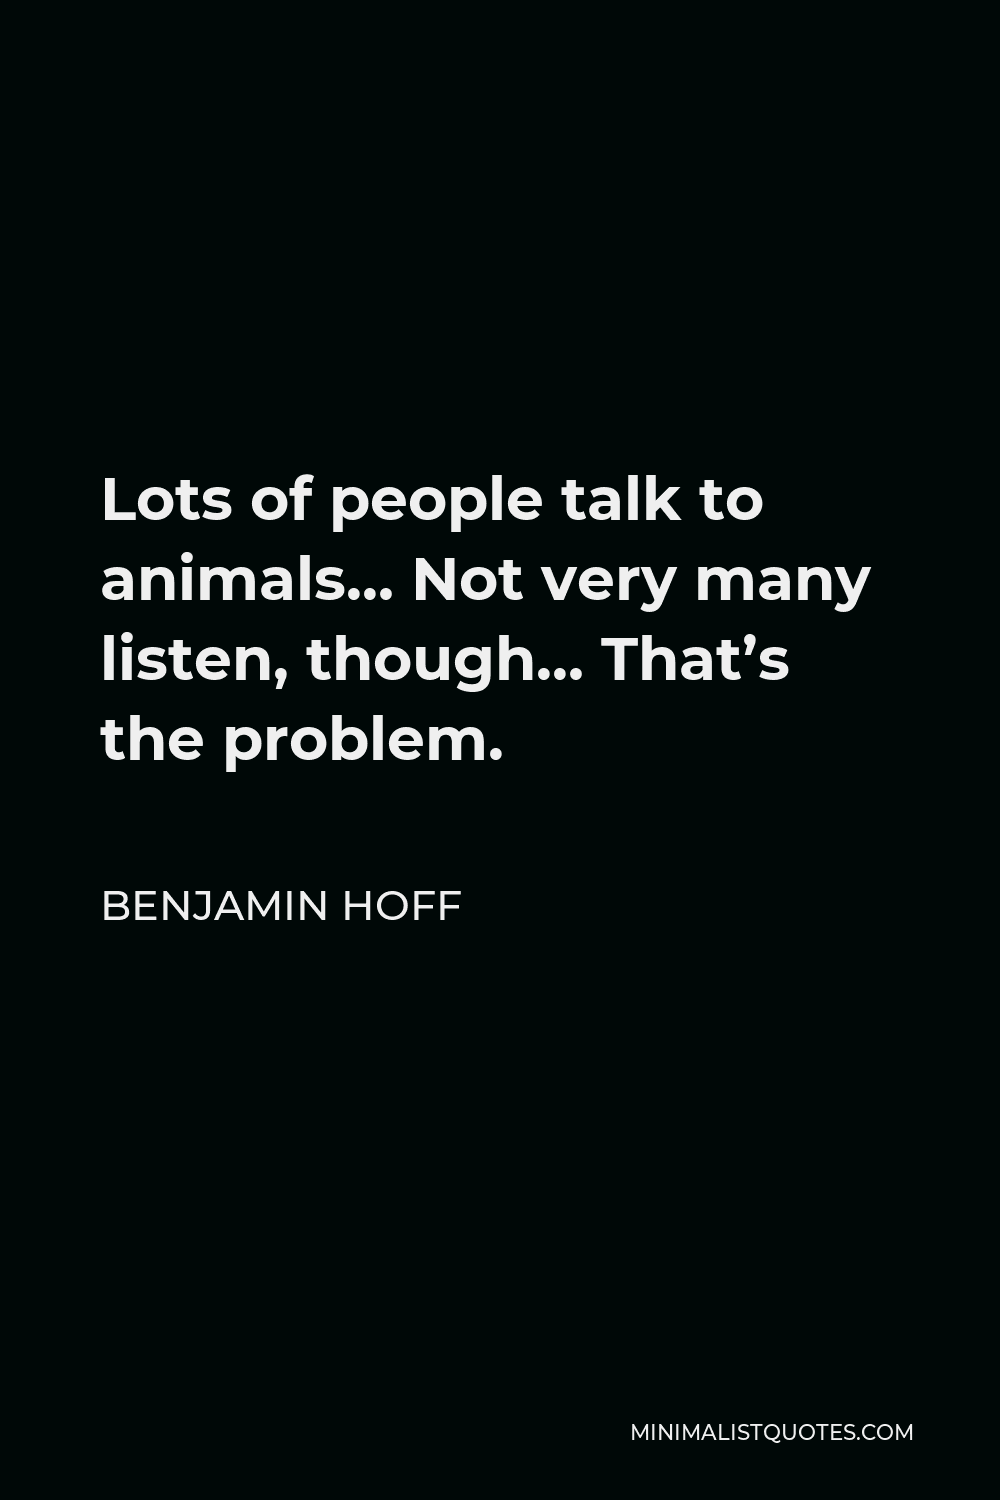 Benjamin Hoff Quote - Lots of people talk to animals… Not very many listen, though… That’s the problem.